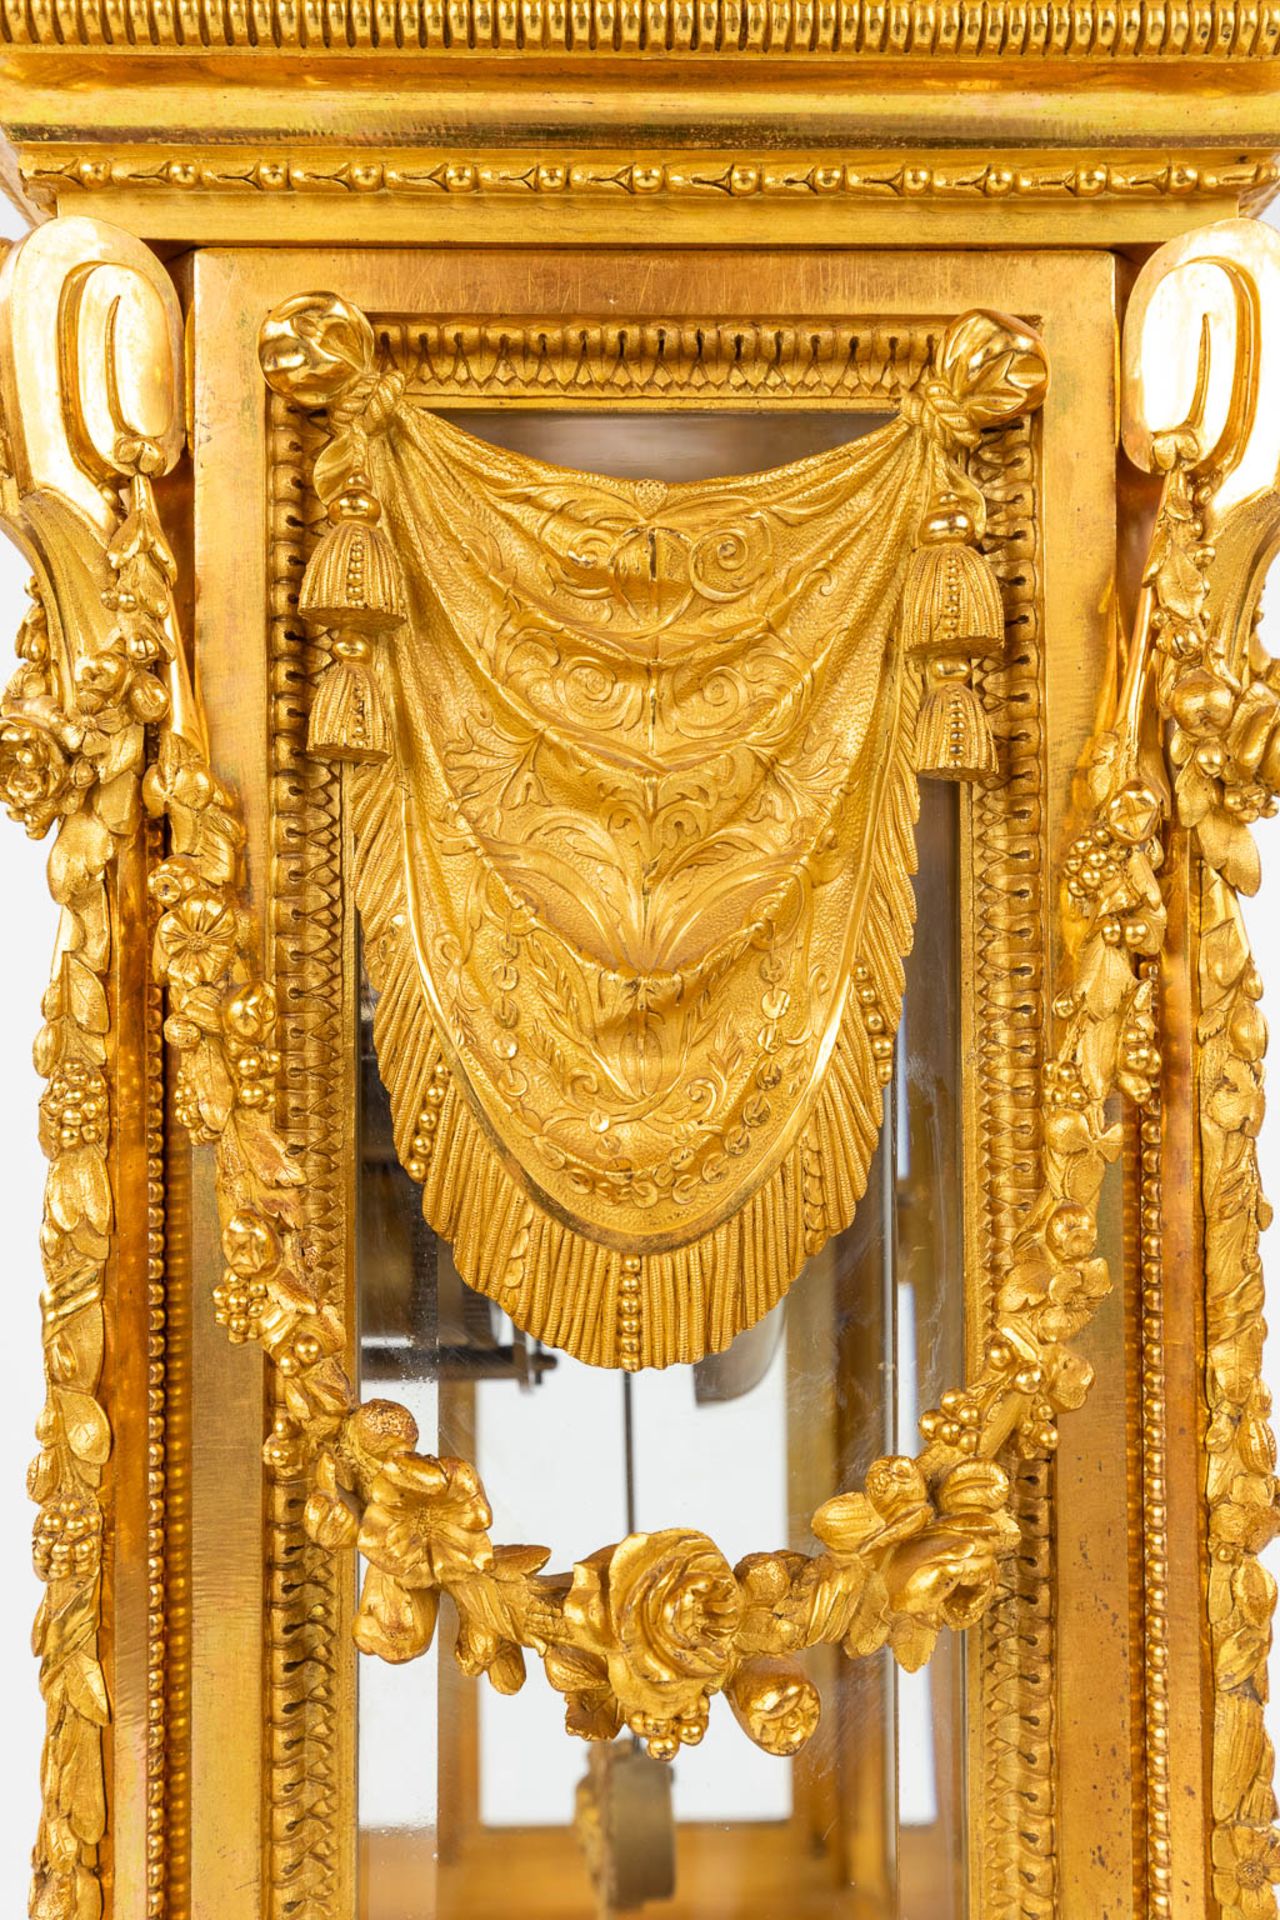 An imposing three-piece mantle garniture clock and candelabra, gilt bronze in Louis XVI style. Maiso - Image 20 of 38